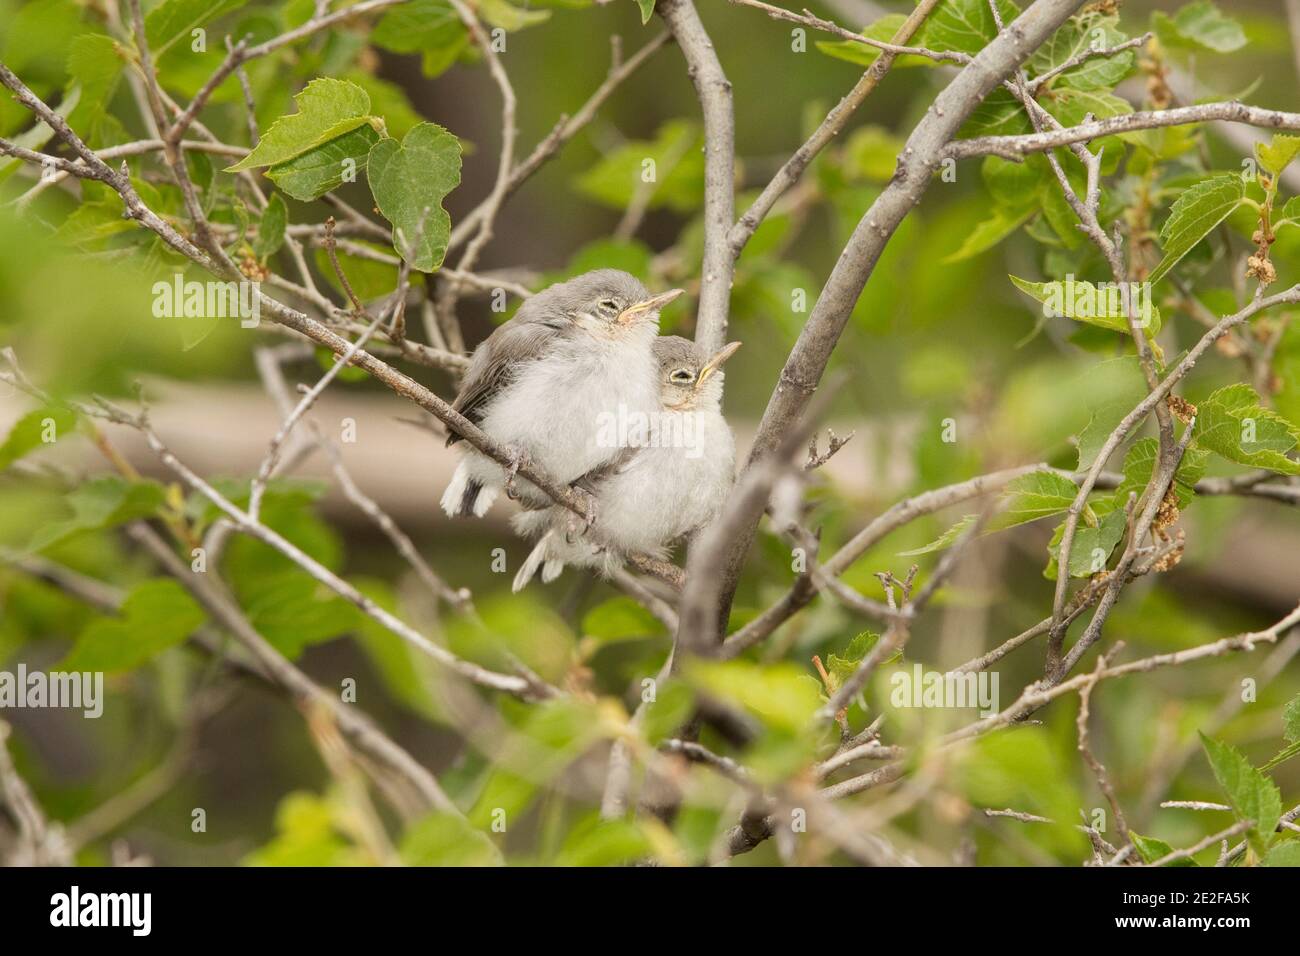 Black-capped Gnatcatcher fledglings, Polioptila nigriceps, perched in hackberry tree. Stock Photo